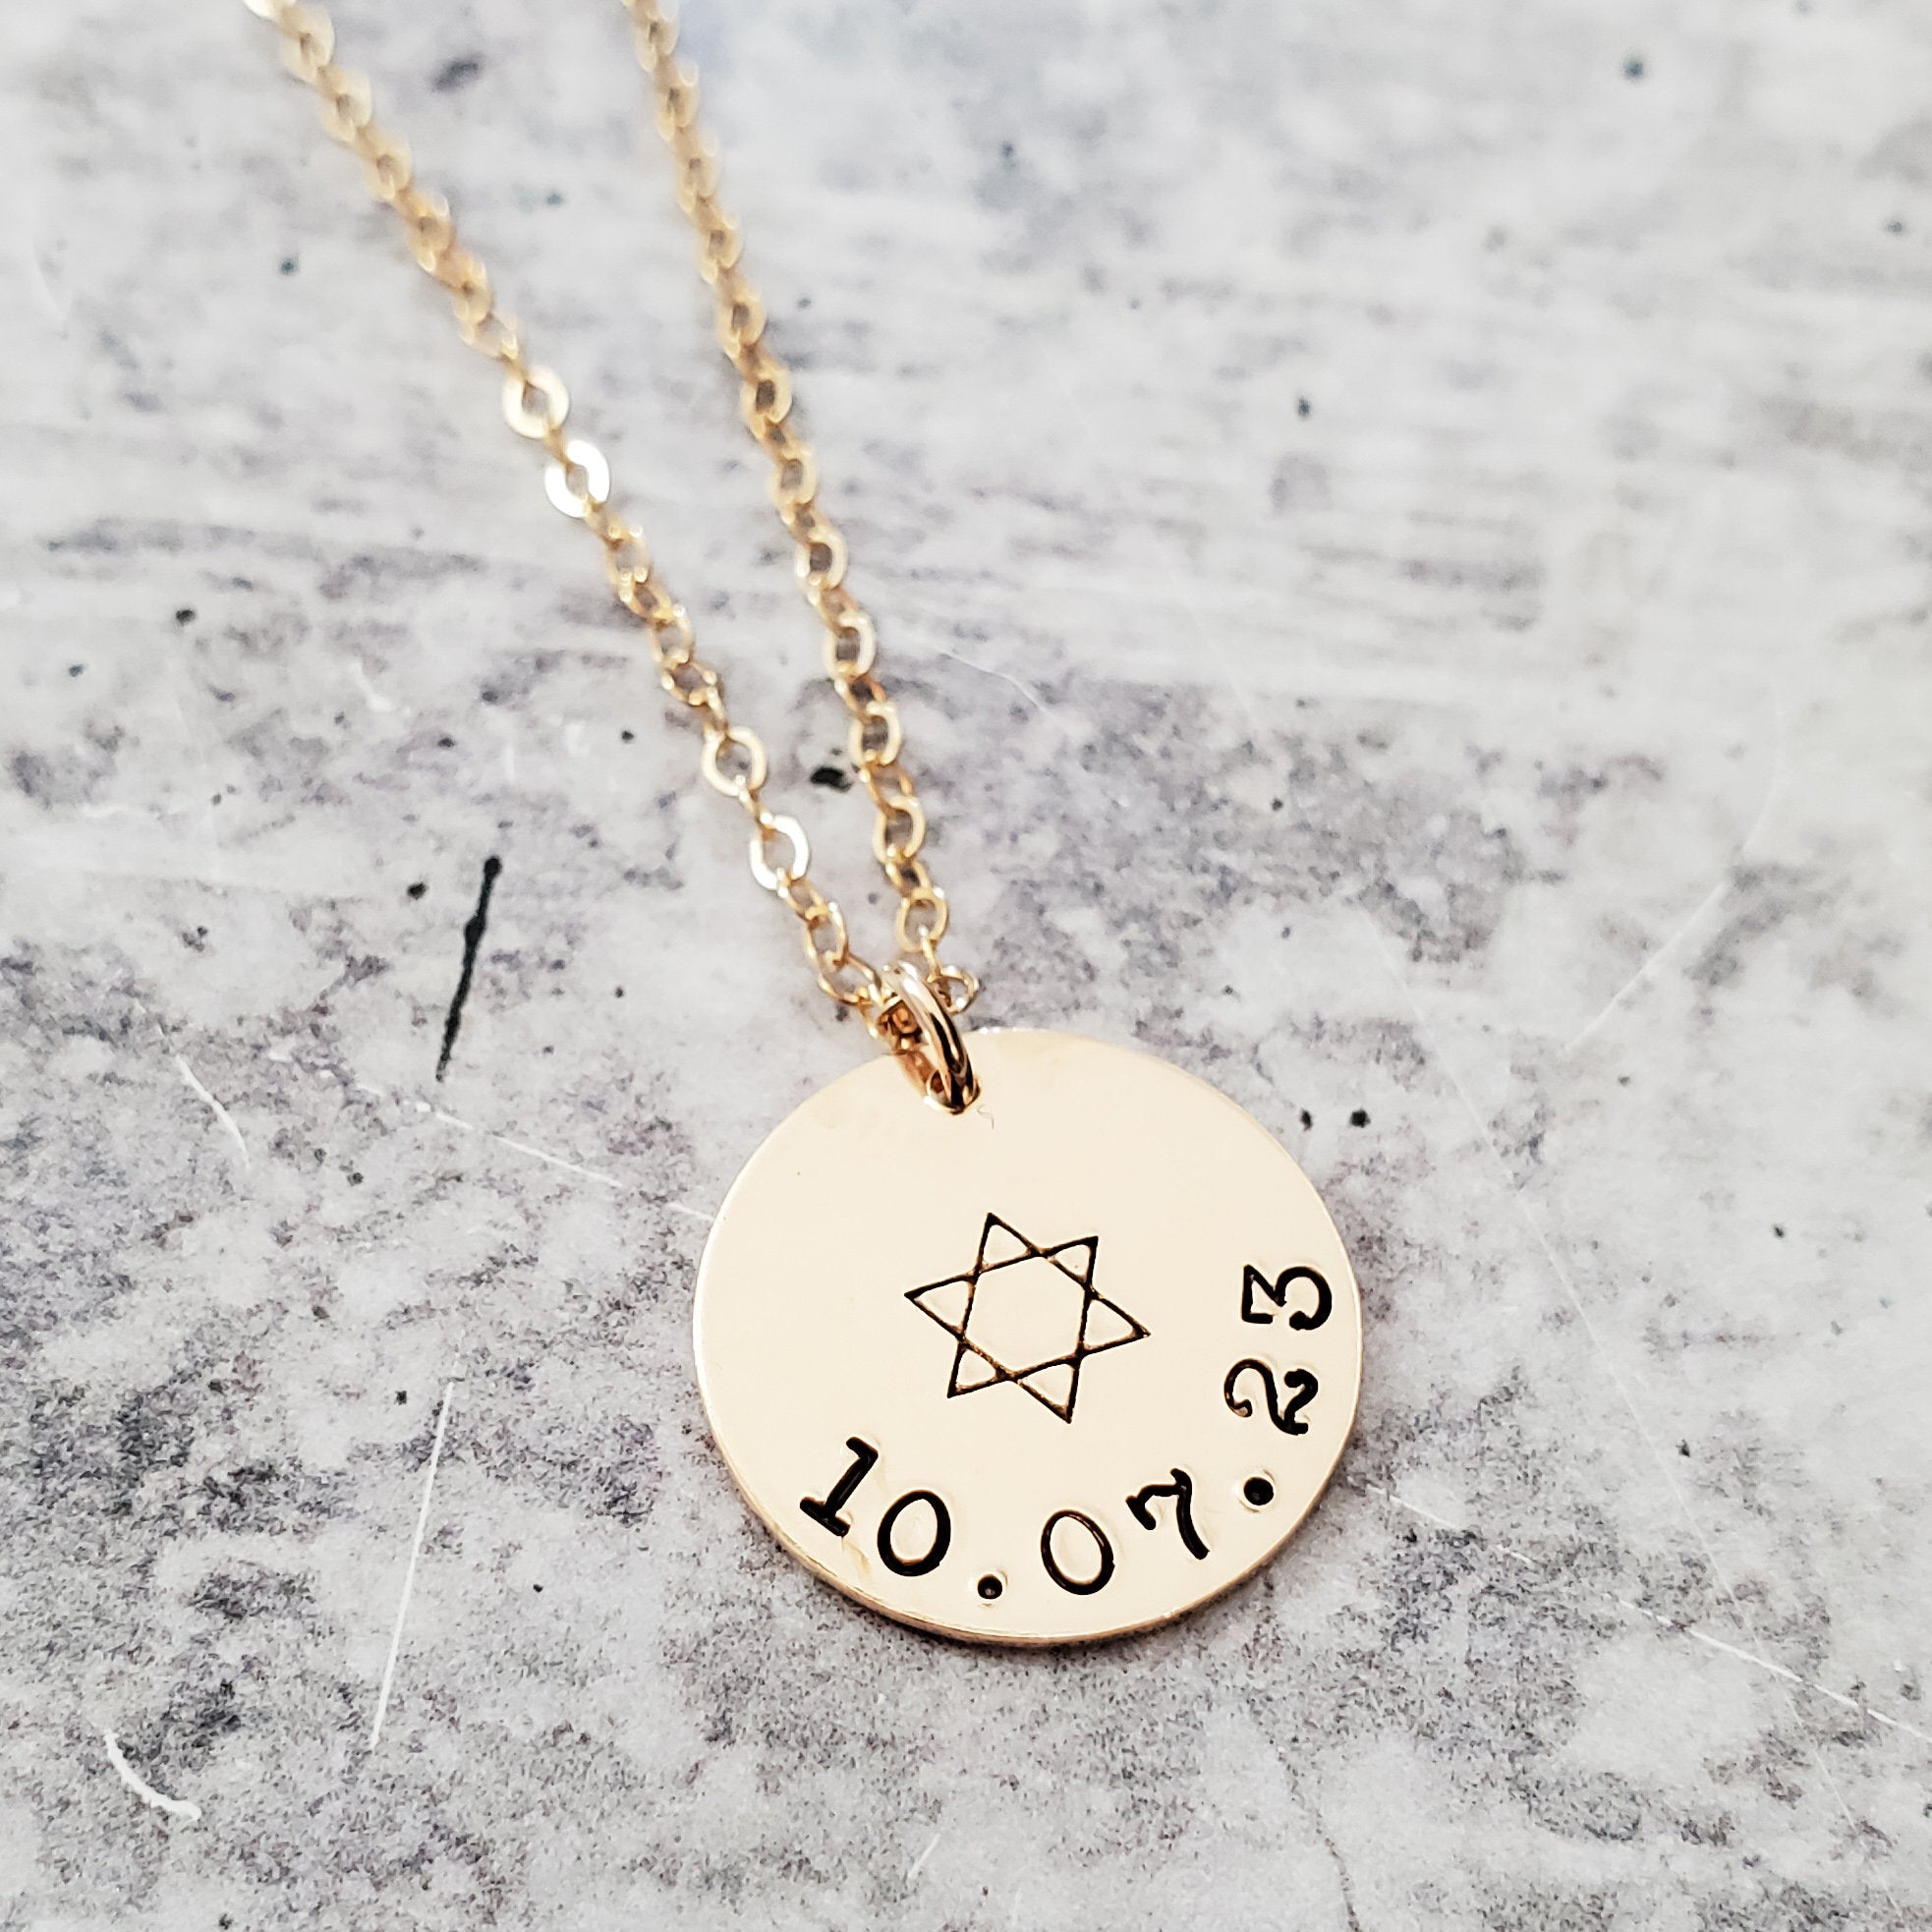 Jewish Pride Personalized Necklace - Star of David October 7 Gold Pendant Salt and Sparkle